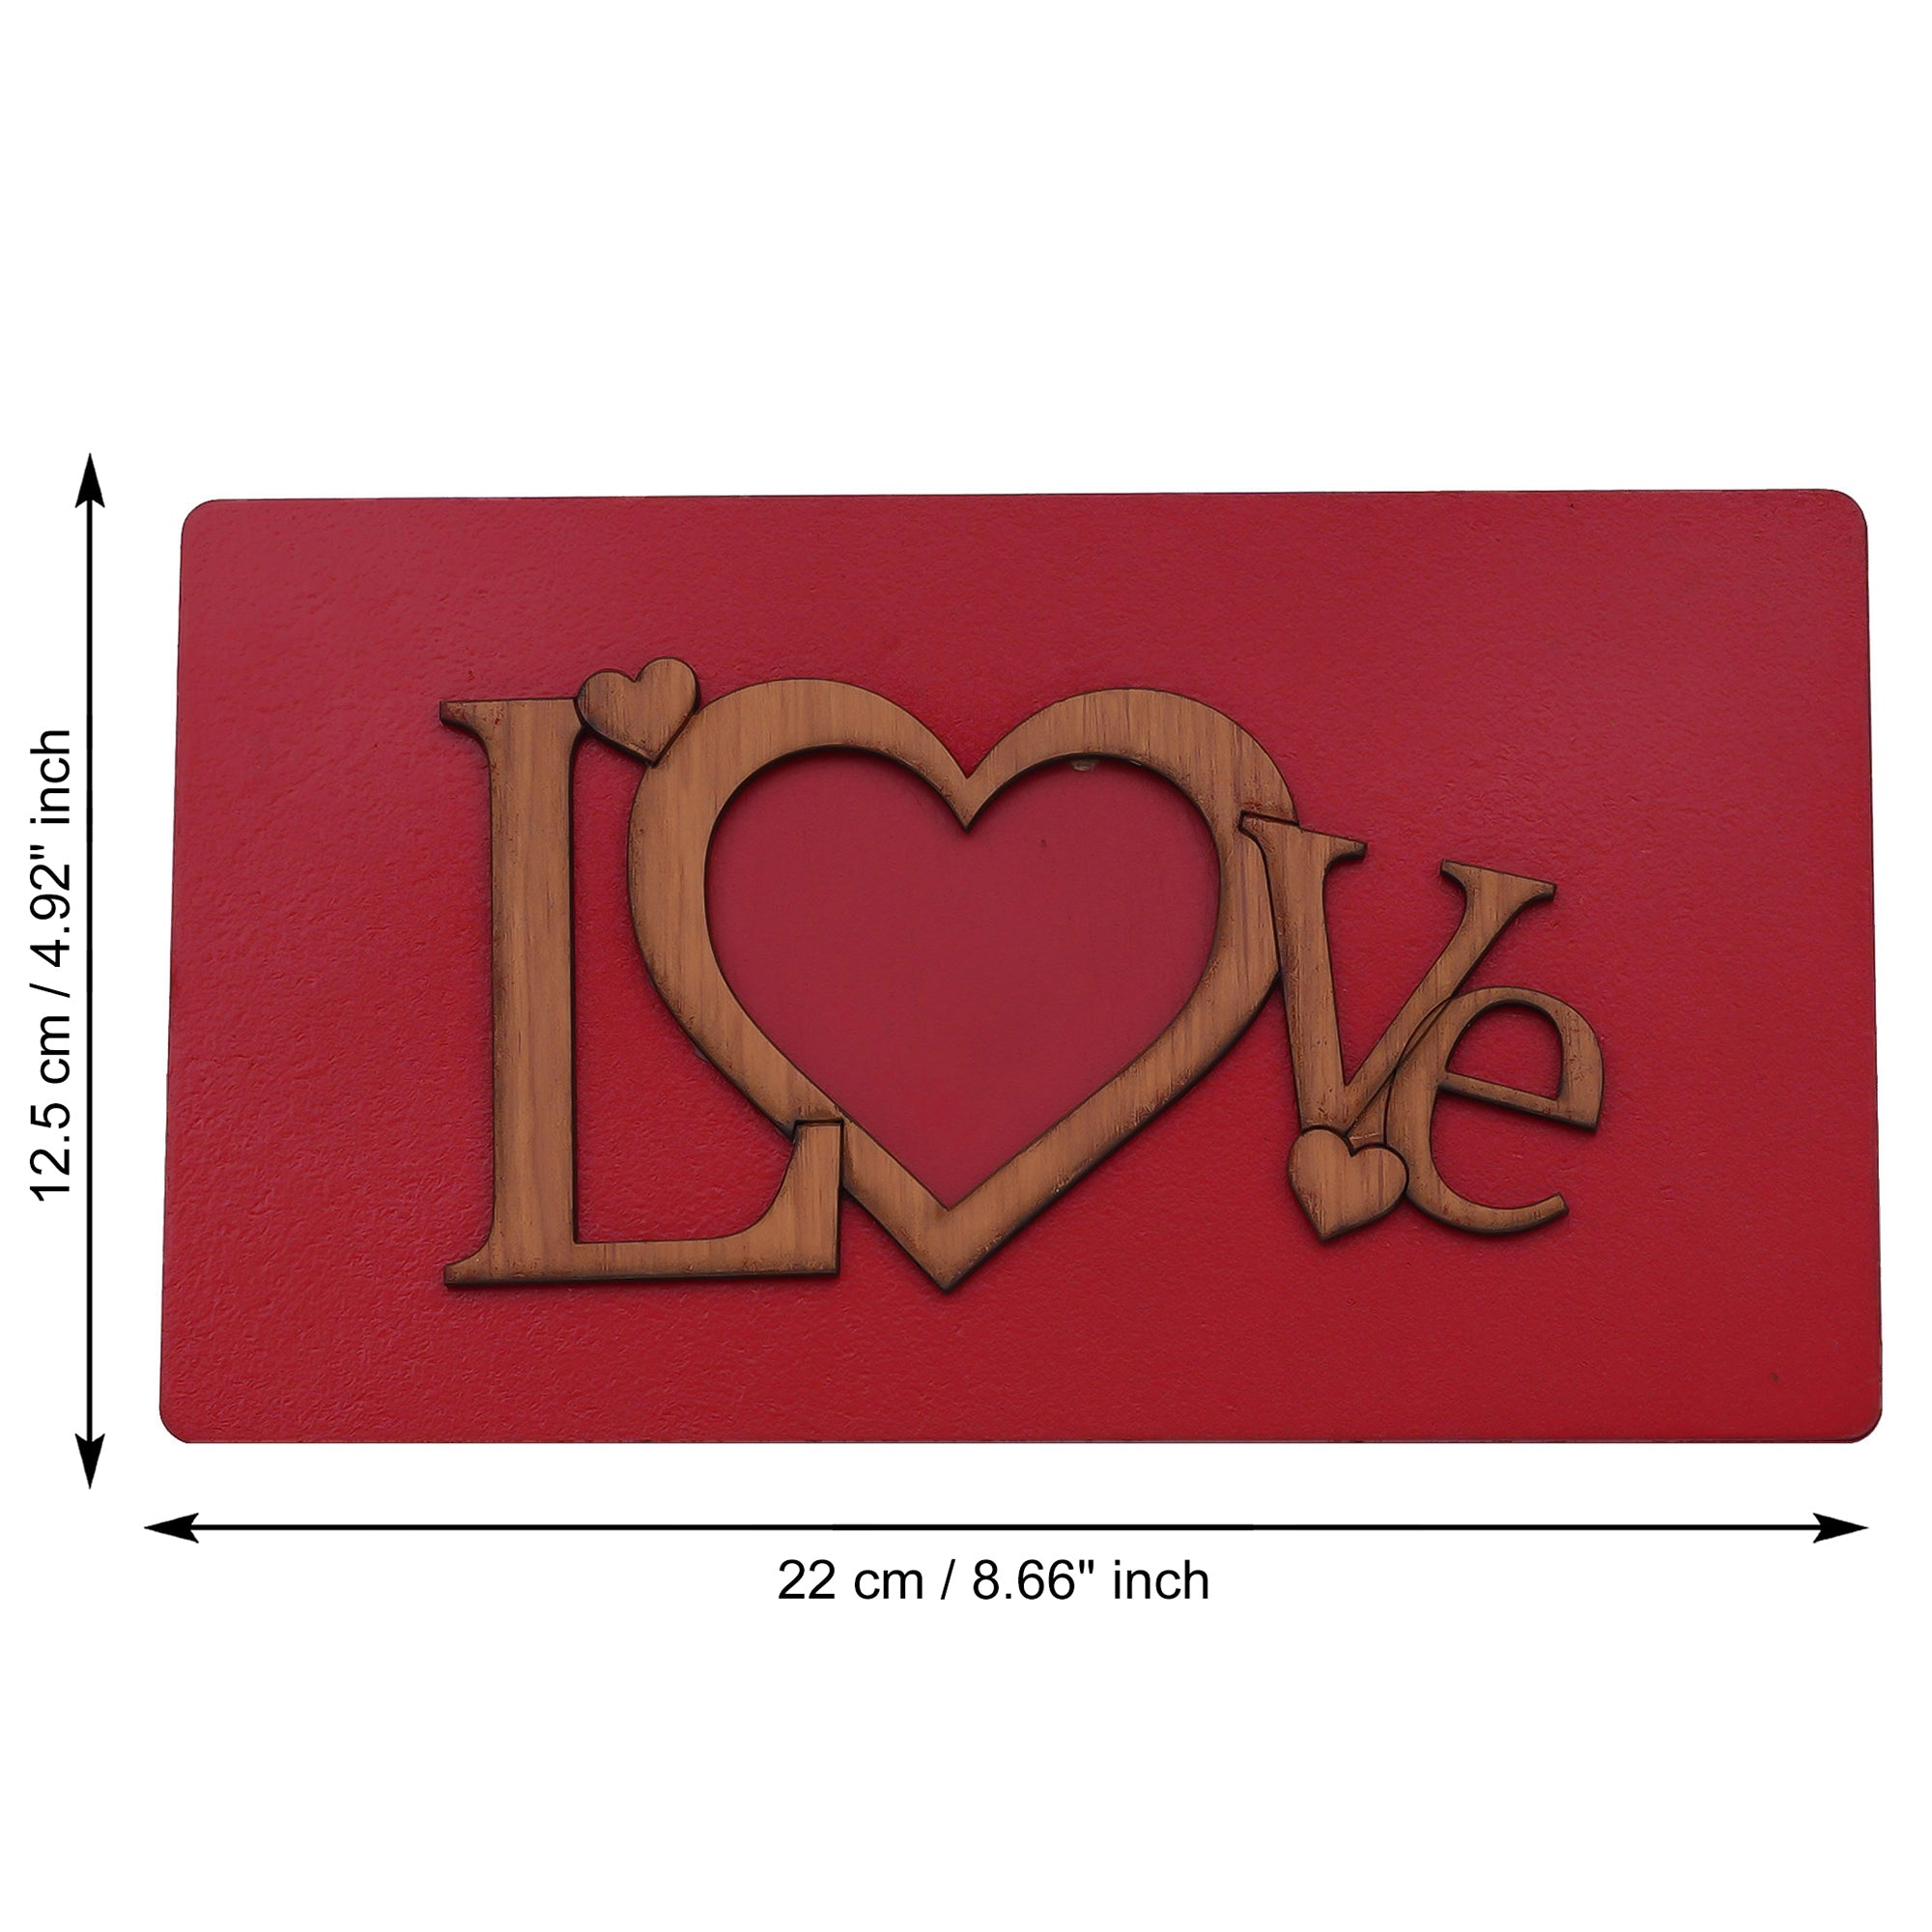 Valentine Combo of Pack of 12 Love Coupons Gift Cards Set, Golden Rose Gift Set, "Love" Wooden Photo Frame With Red Stand, Bride Kissing Groom Romantic Polyresin Decorative Showpiece 6